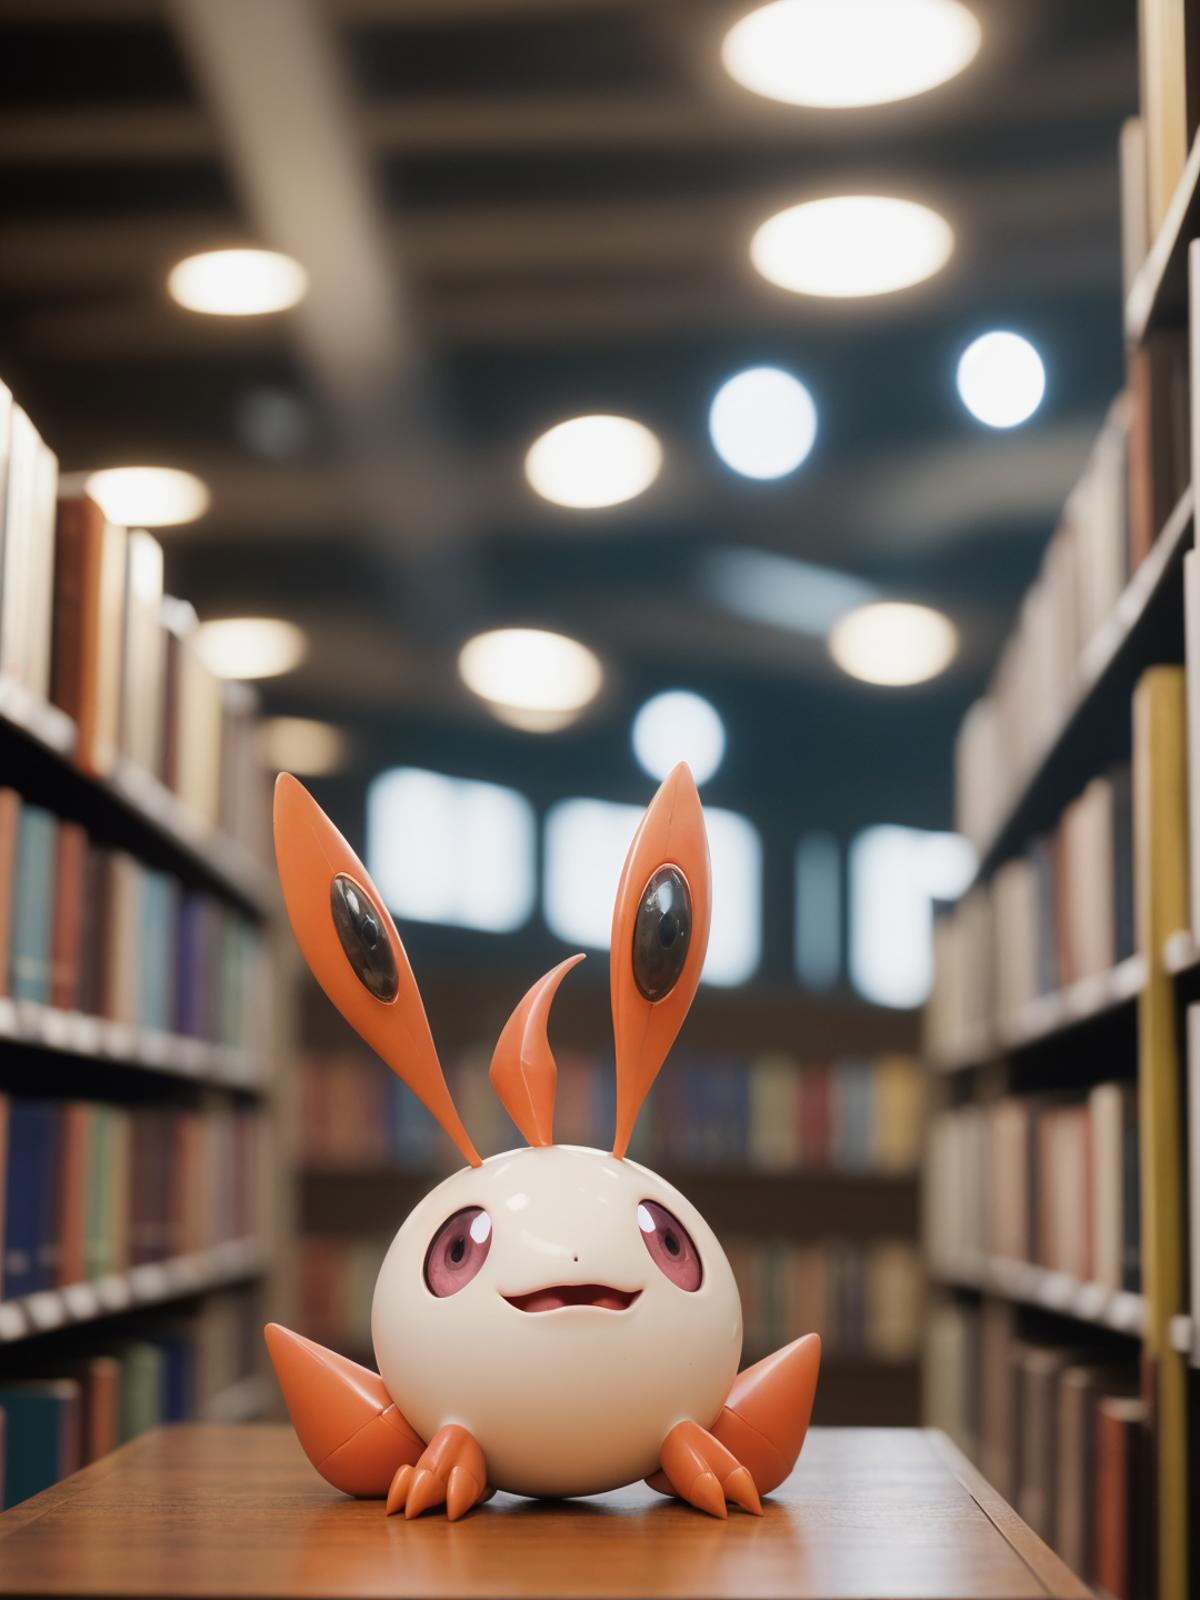 A cartoon character figurine stands in the middle of a library.